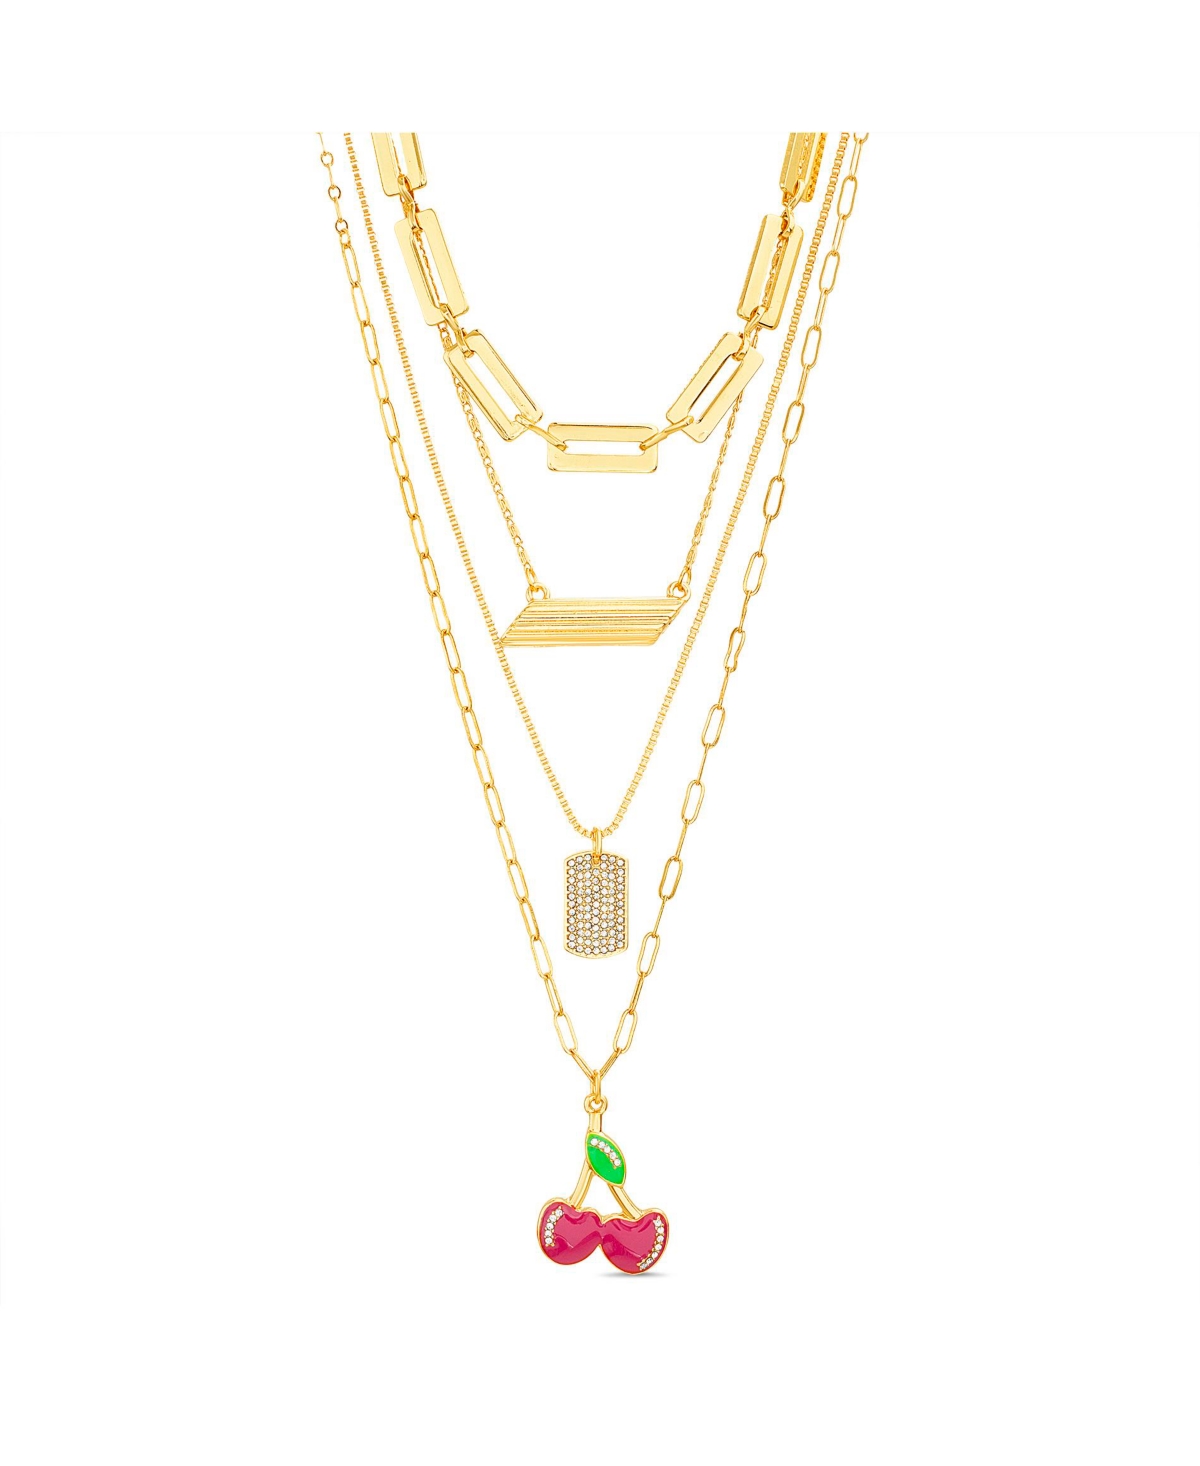 4 Chain Necklace Set with Cherry Pendant - Multi